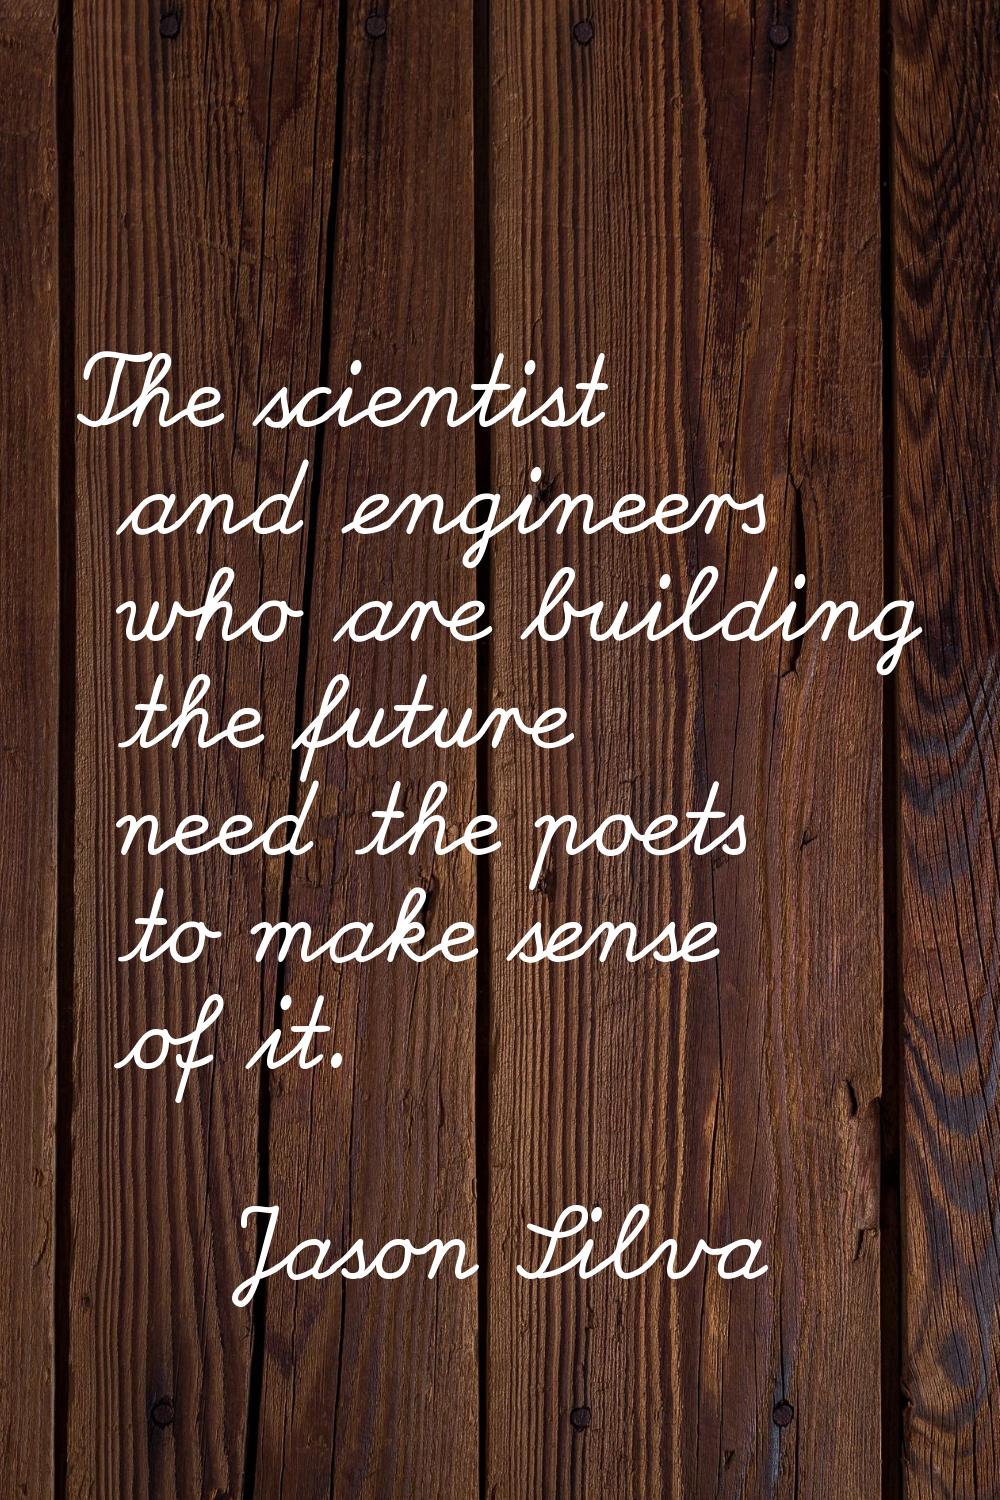 The scientist and engineers who are building the future need the poets to make sense of it.